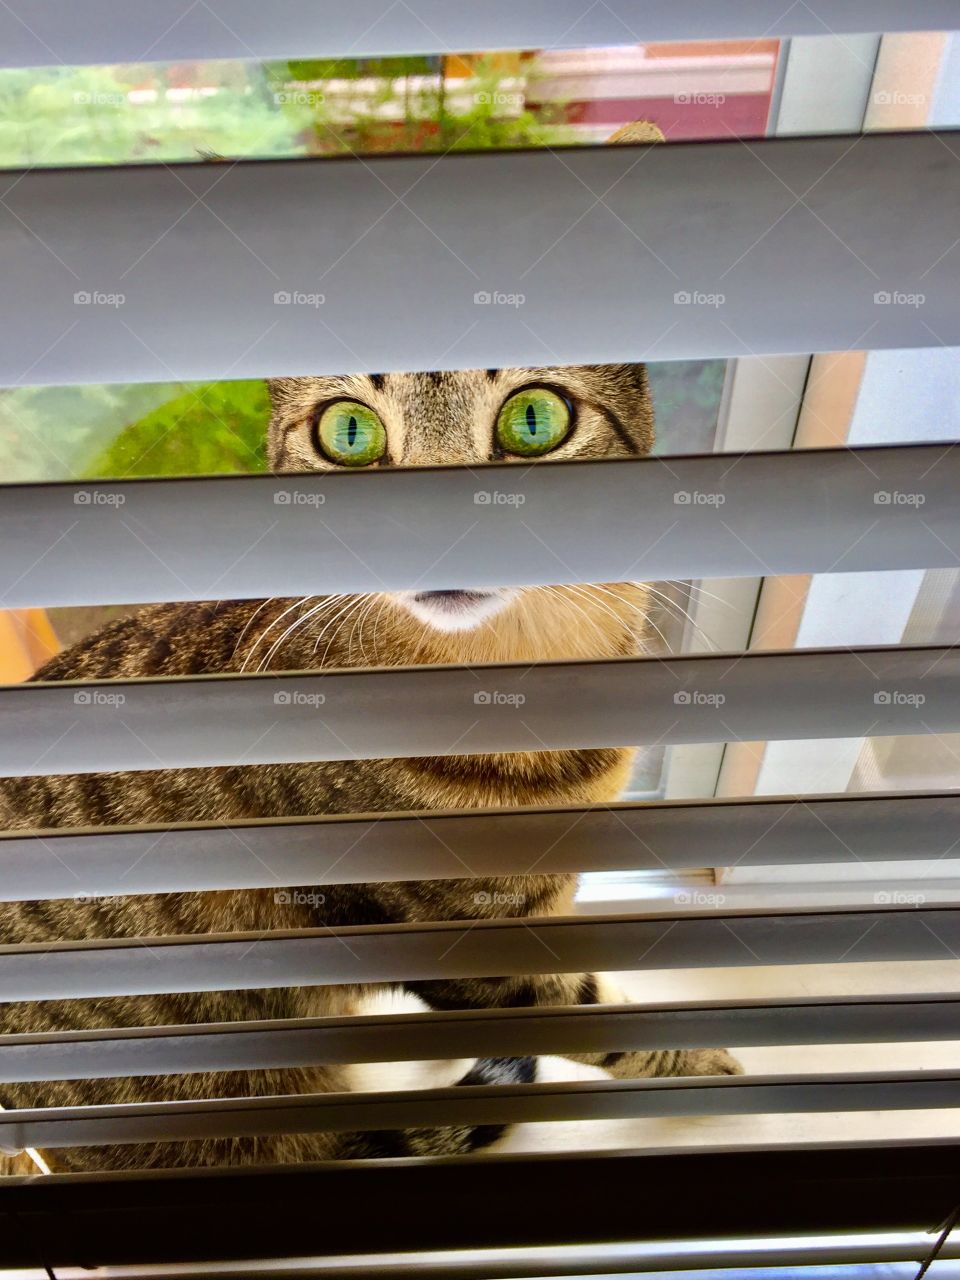 Tabby cat looking through blinds